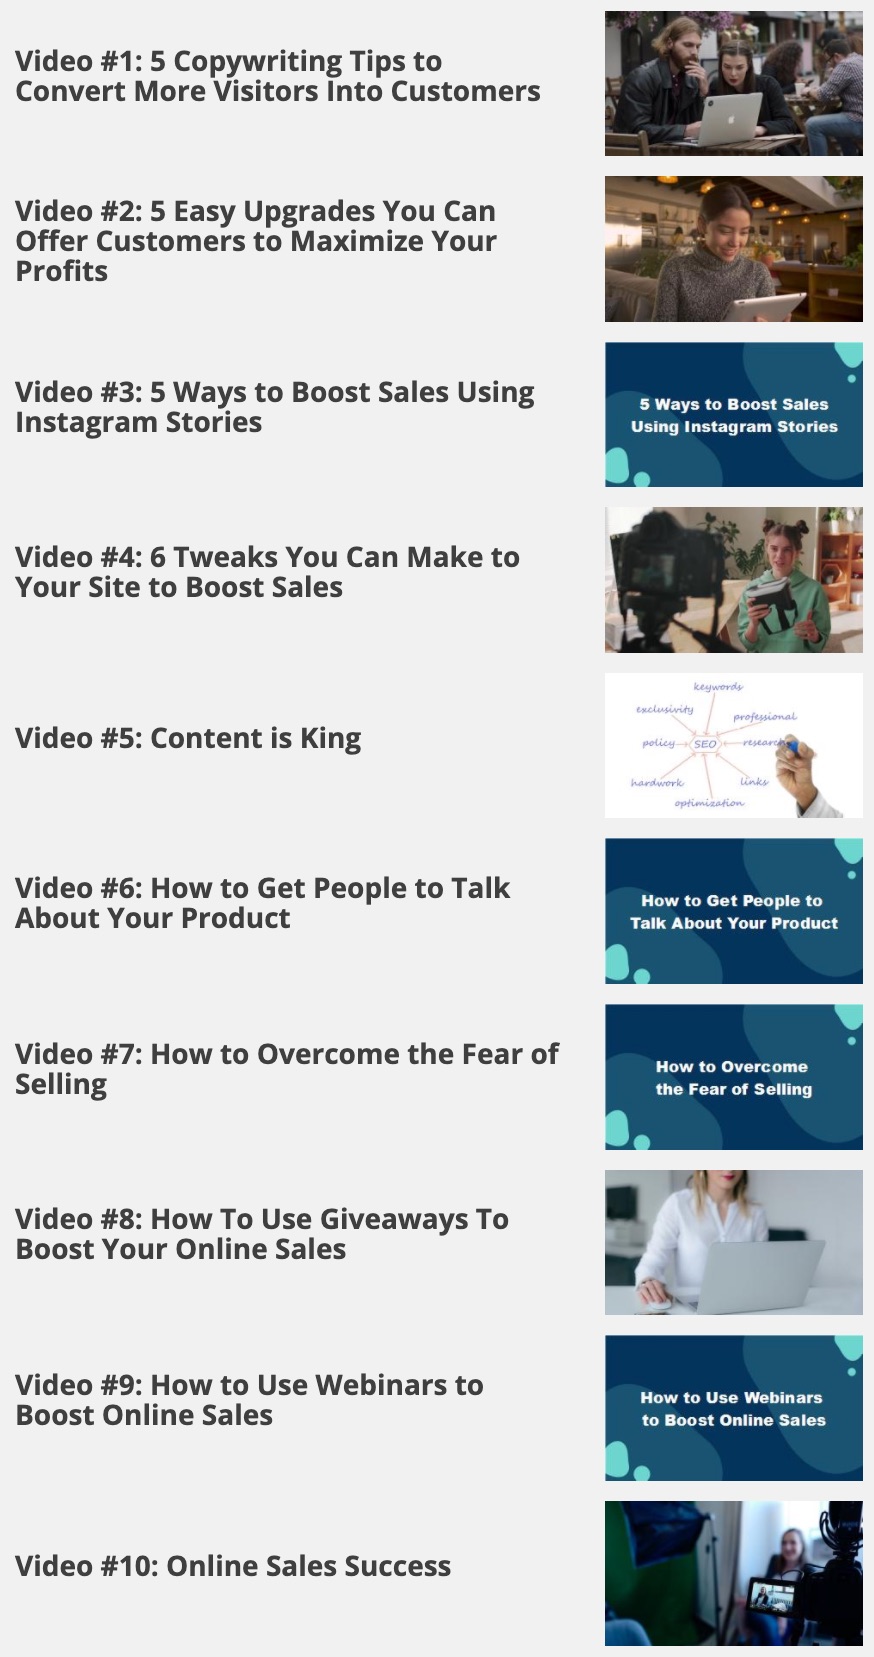 Boost Your Online Sales Video overview